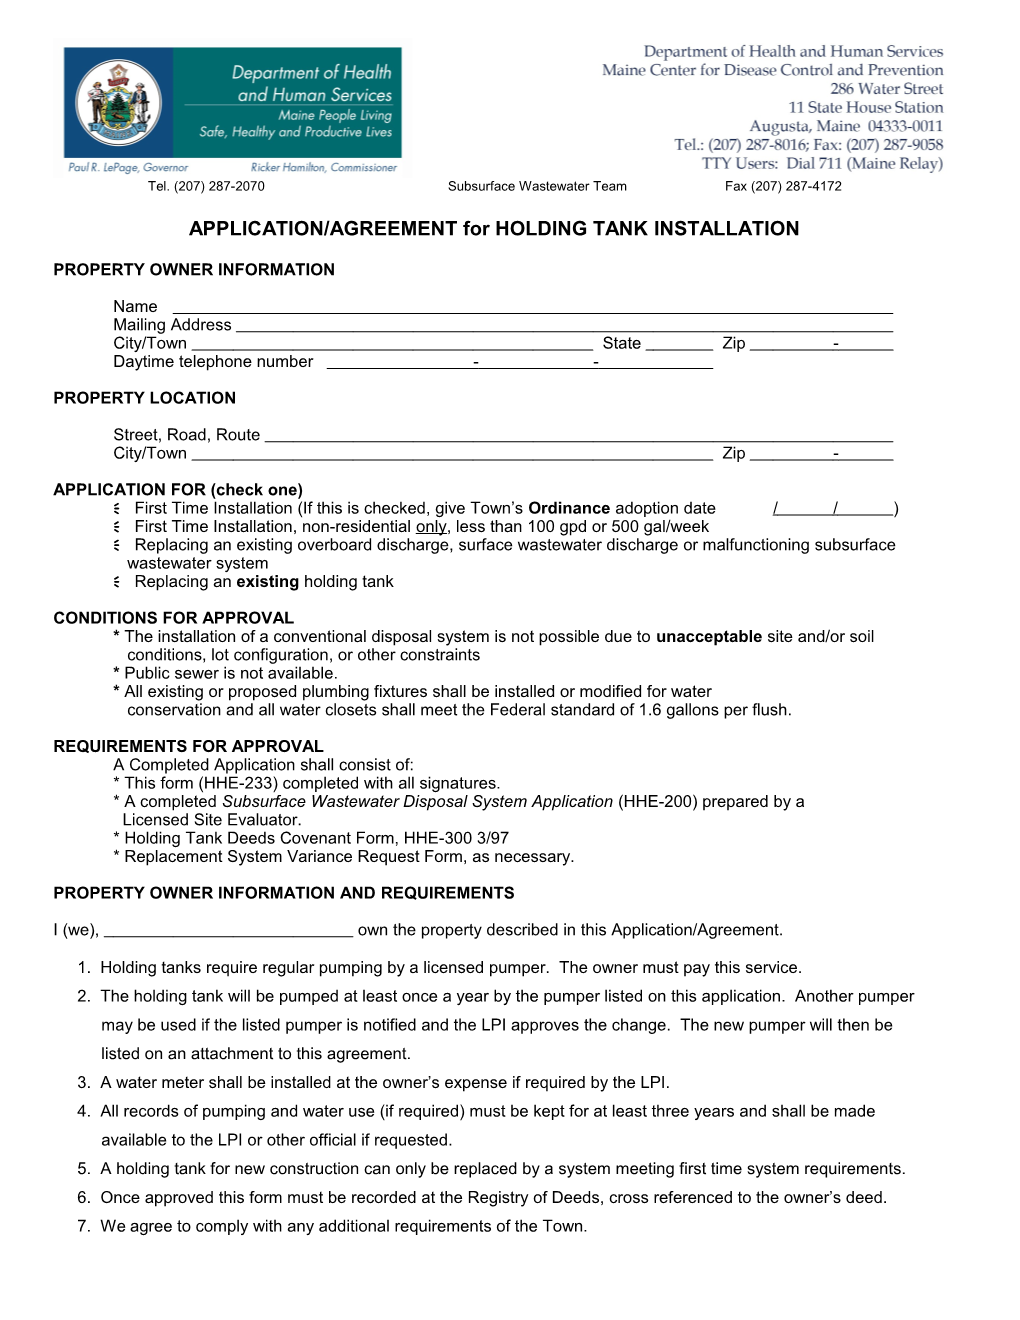 APPLICATION/AGREEMENT for HOLDING TANK INSTALLATION